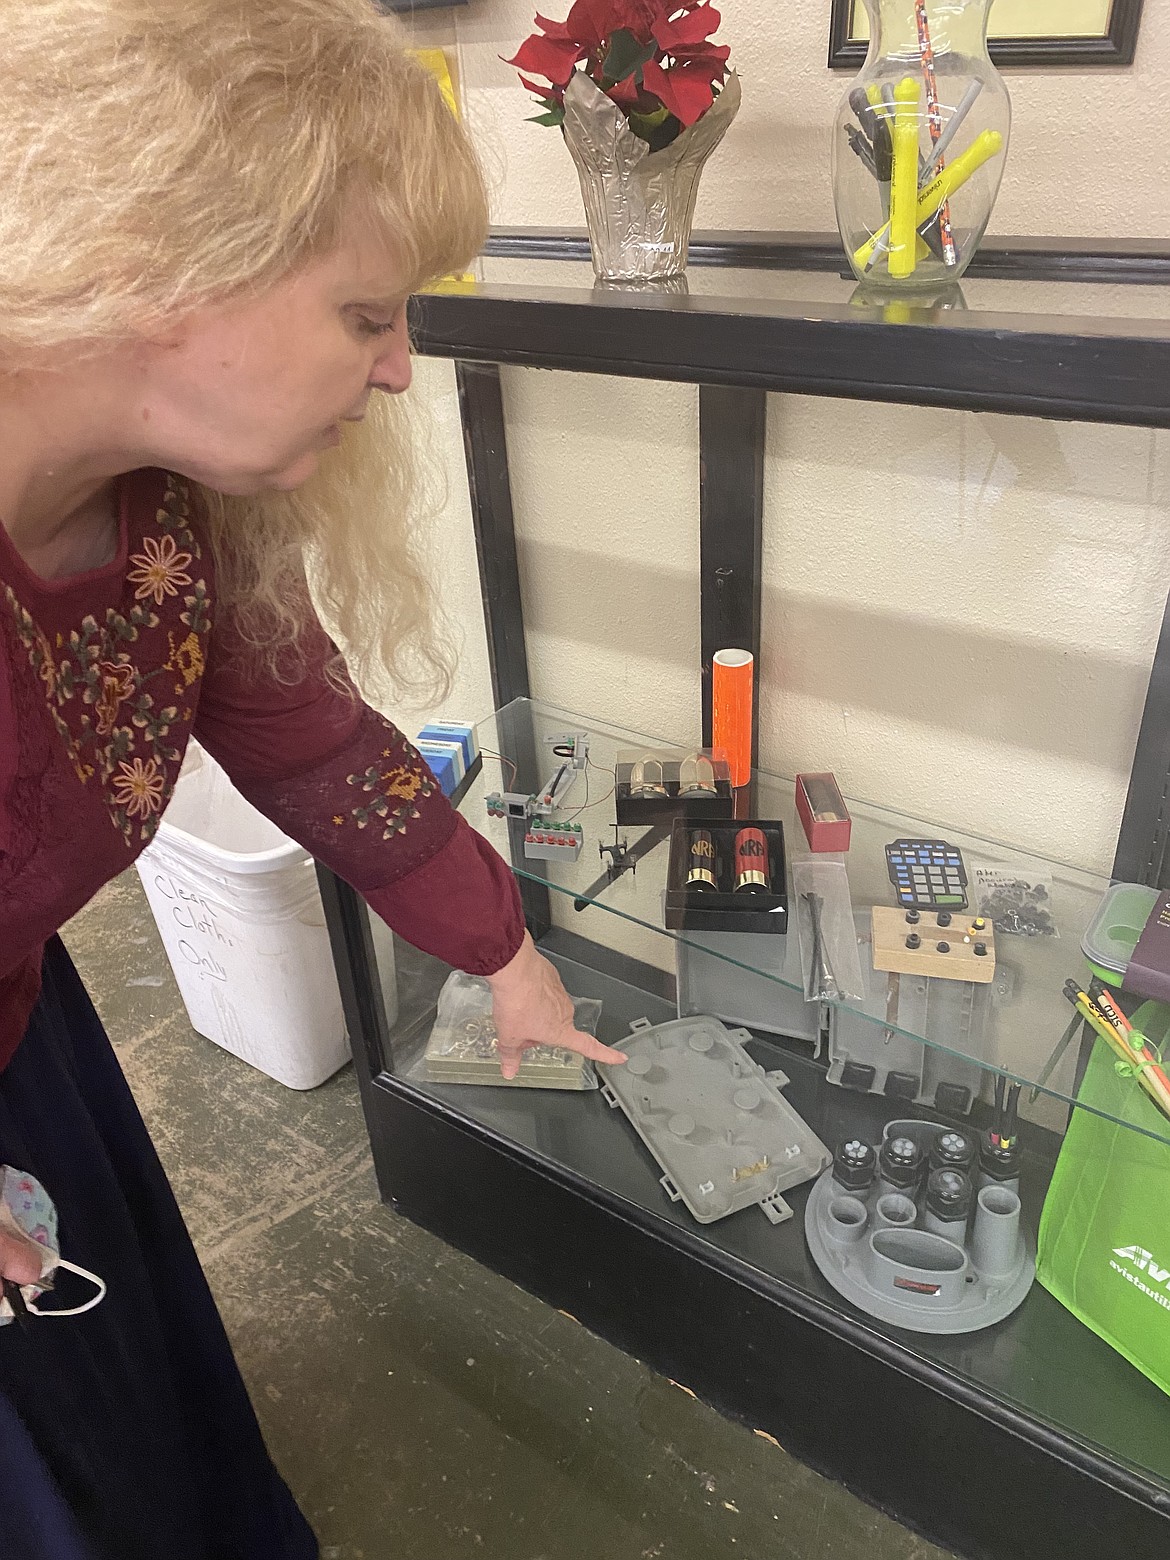 Vice President Terri Johnson points to the intricate projects made in Tesh's Vocational Center. Working with business partners, Tesh clients earn a modest paycheck while learning life skills and serving the community.